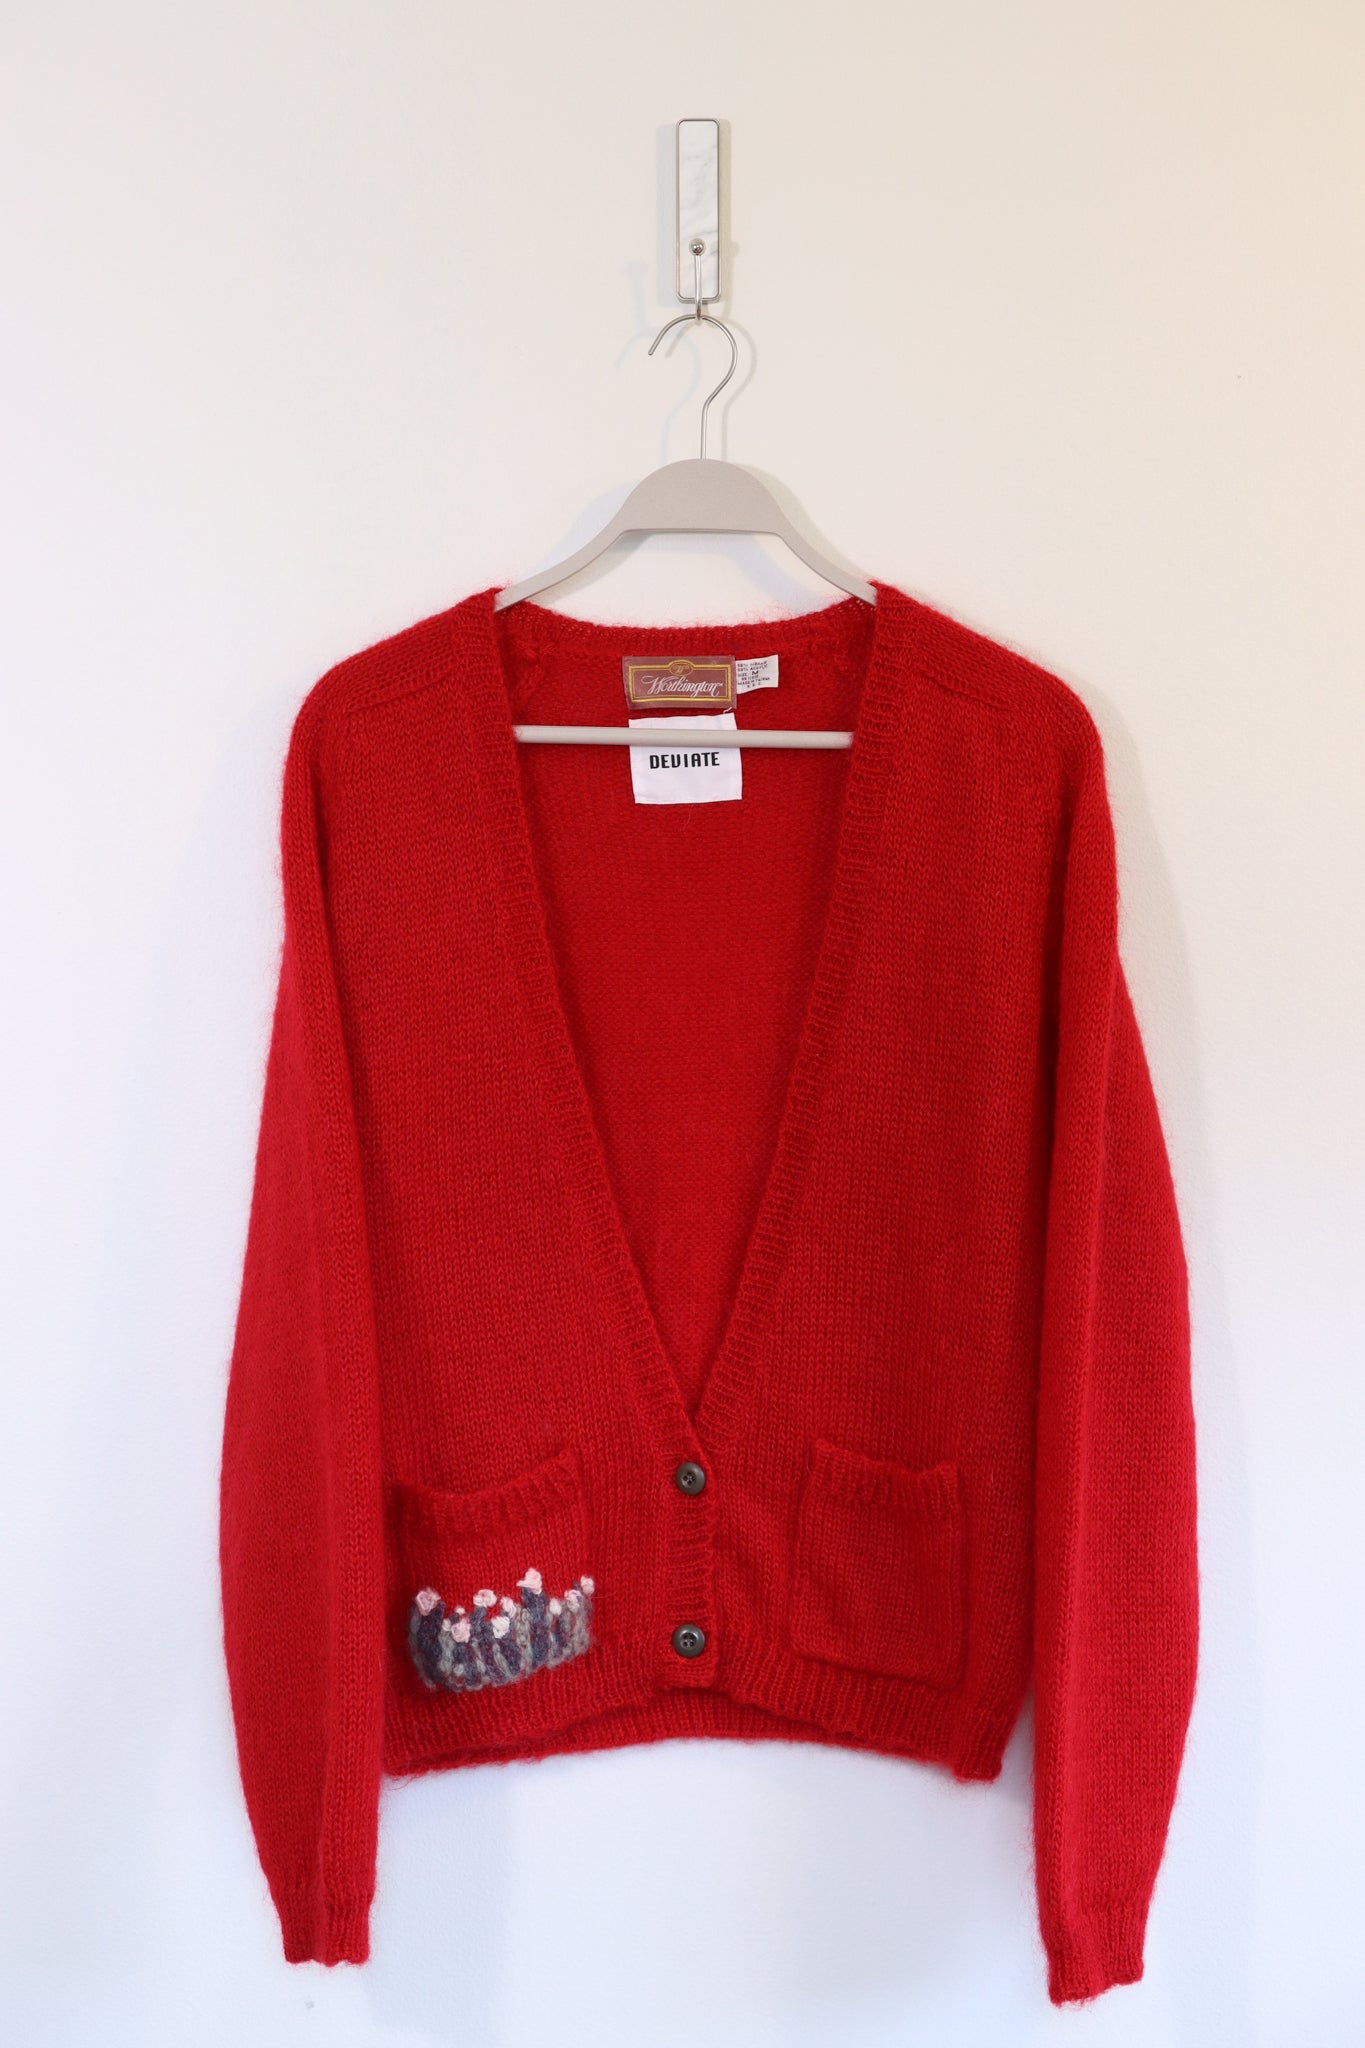 Red Fuzzy Mohair Cardigan with Flower Patch Pocket Embroidery MEDIUM